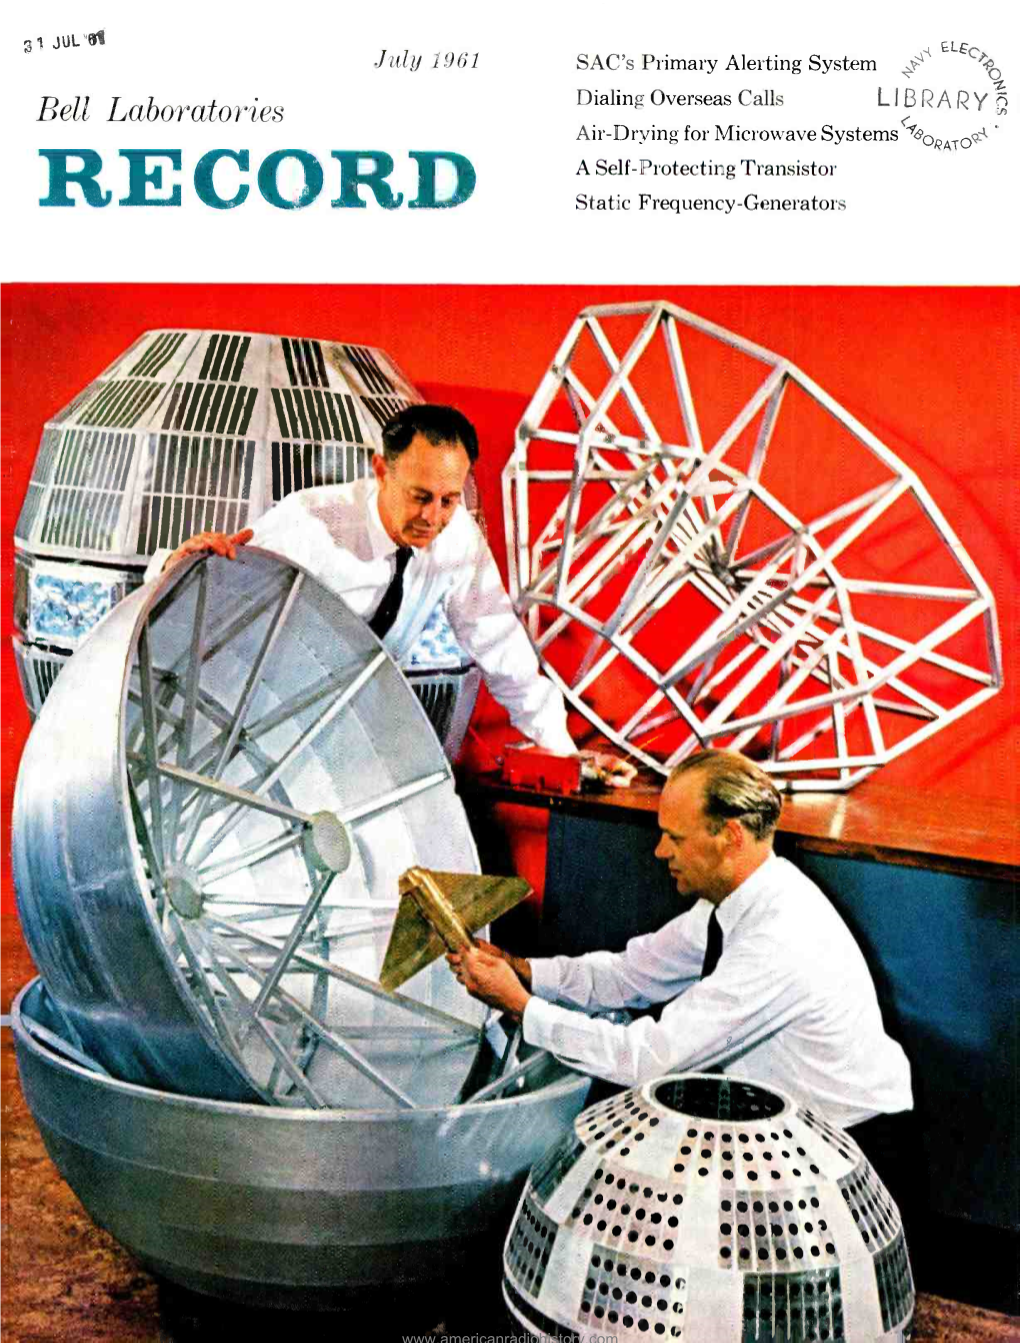 RECORD Static Frequency -Generators